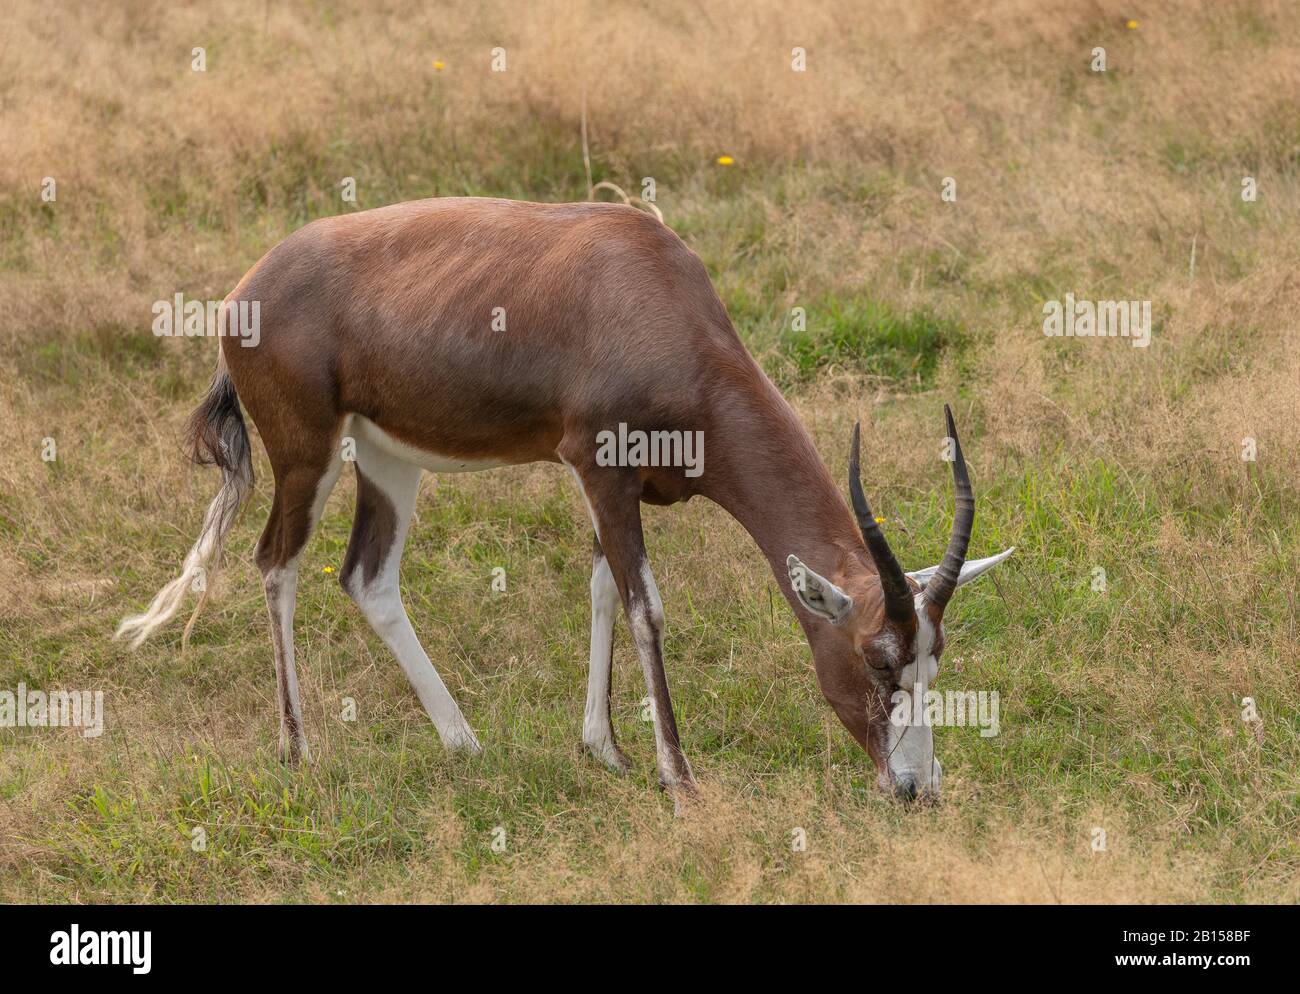 Blesbok, Damaliscus pygargus phillipsi, an antelope endemic to South Africa and Swaziland, grazing in grassland. Stock Photo